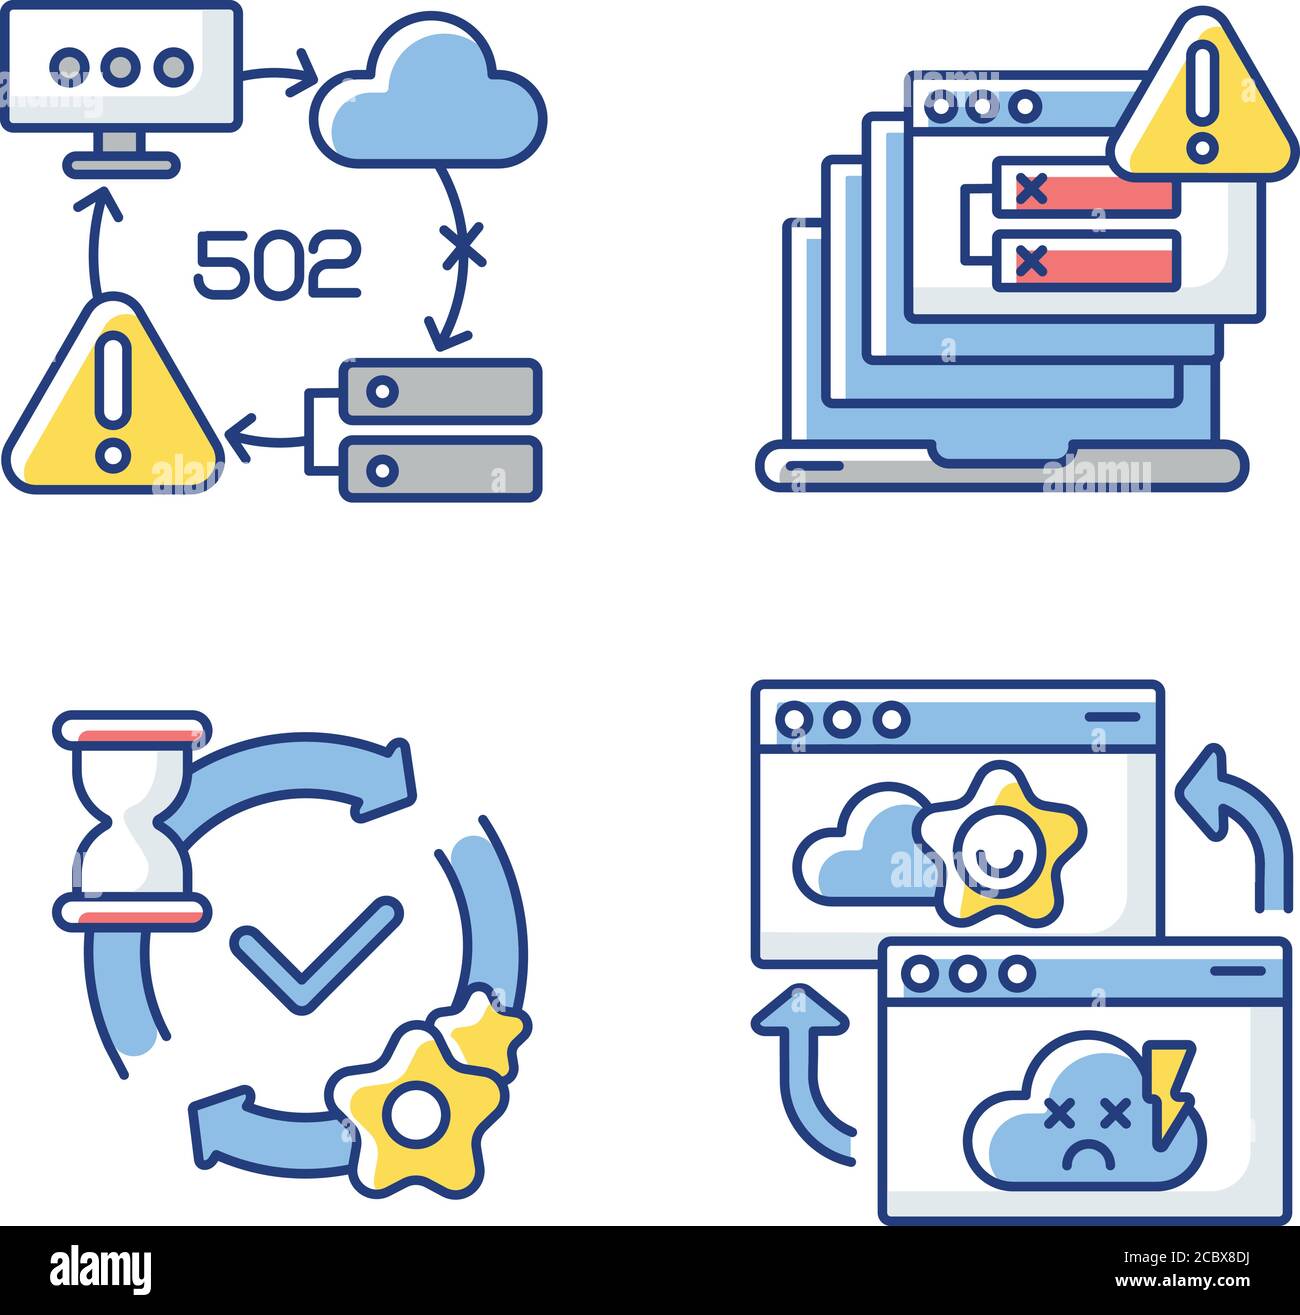 Network notifications RGB color icons set. 502 bad gateway, internal server error, permanent redirect and request processing messages. Isolated vector Stock Vector